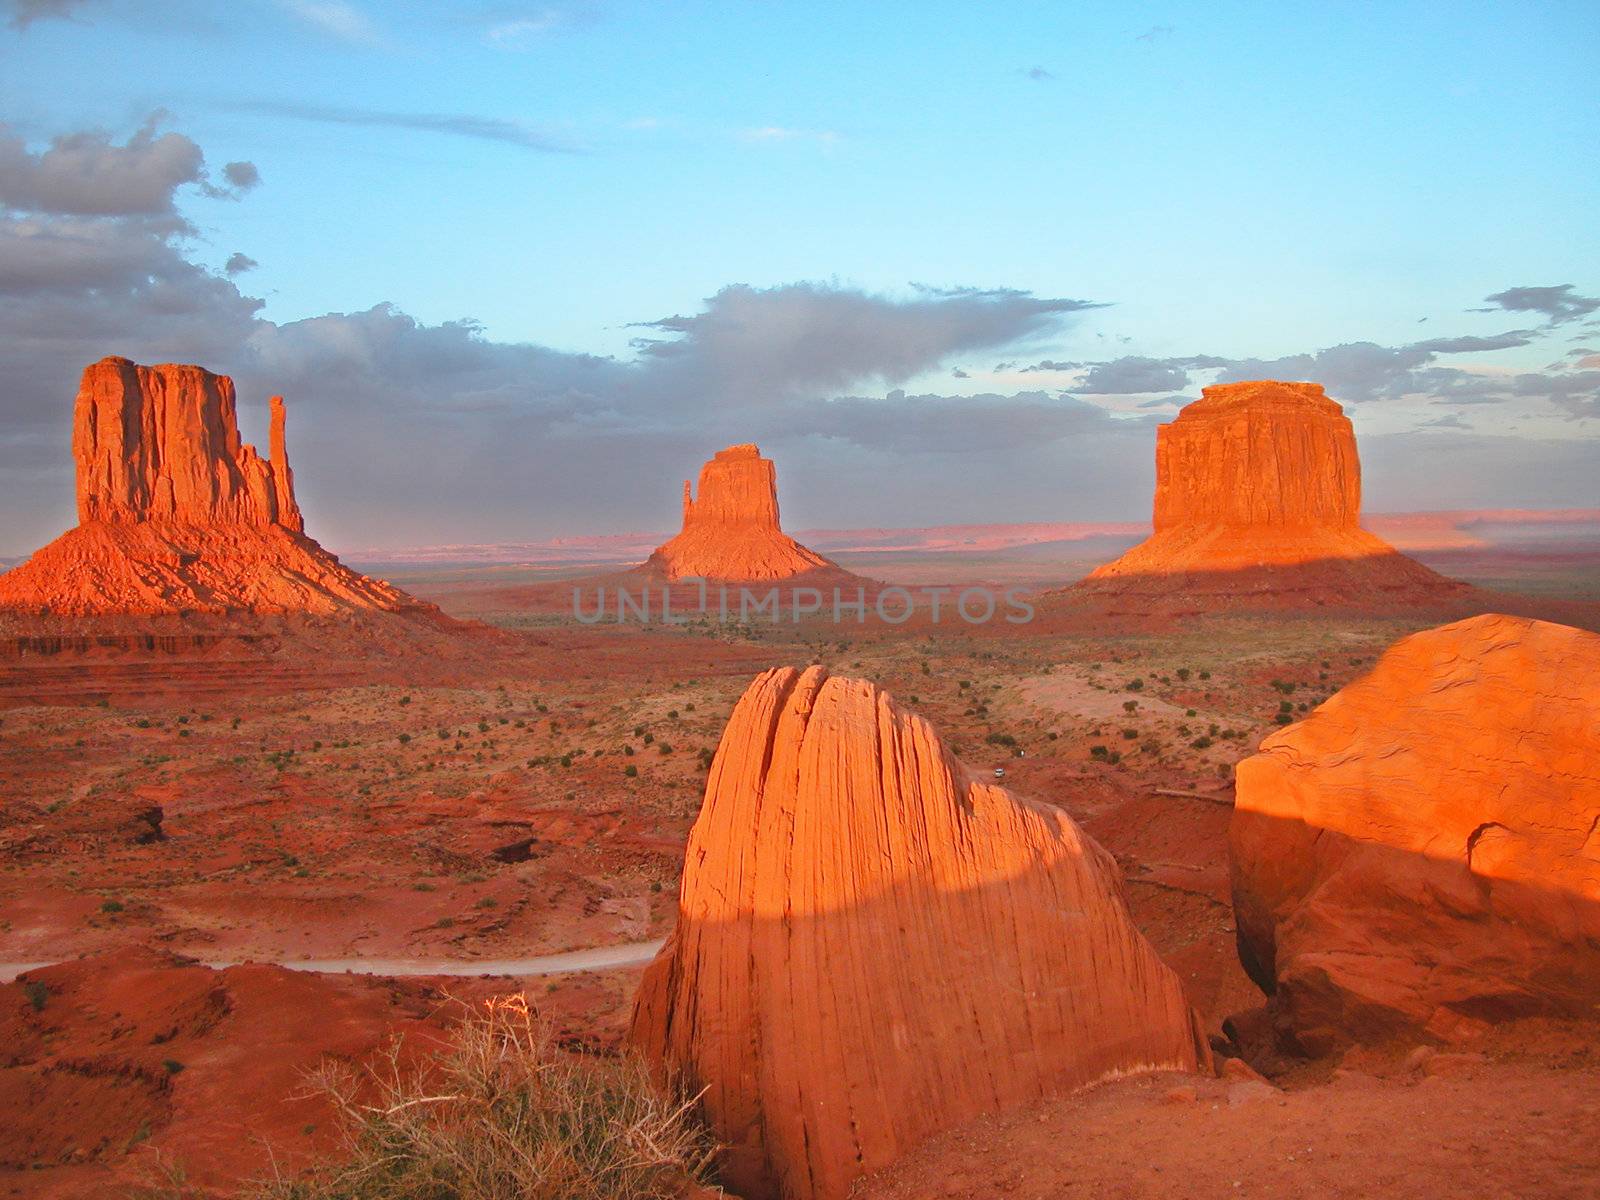 Sunset in Monument Valley, U.S.A., August 2004 by jovannig